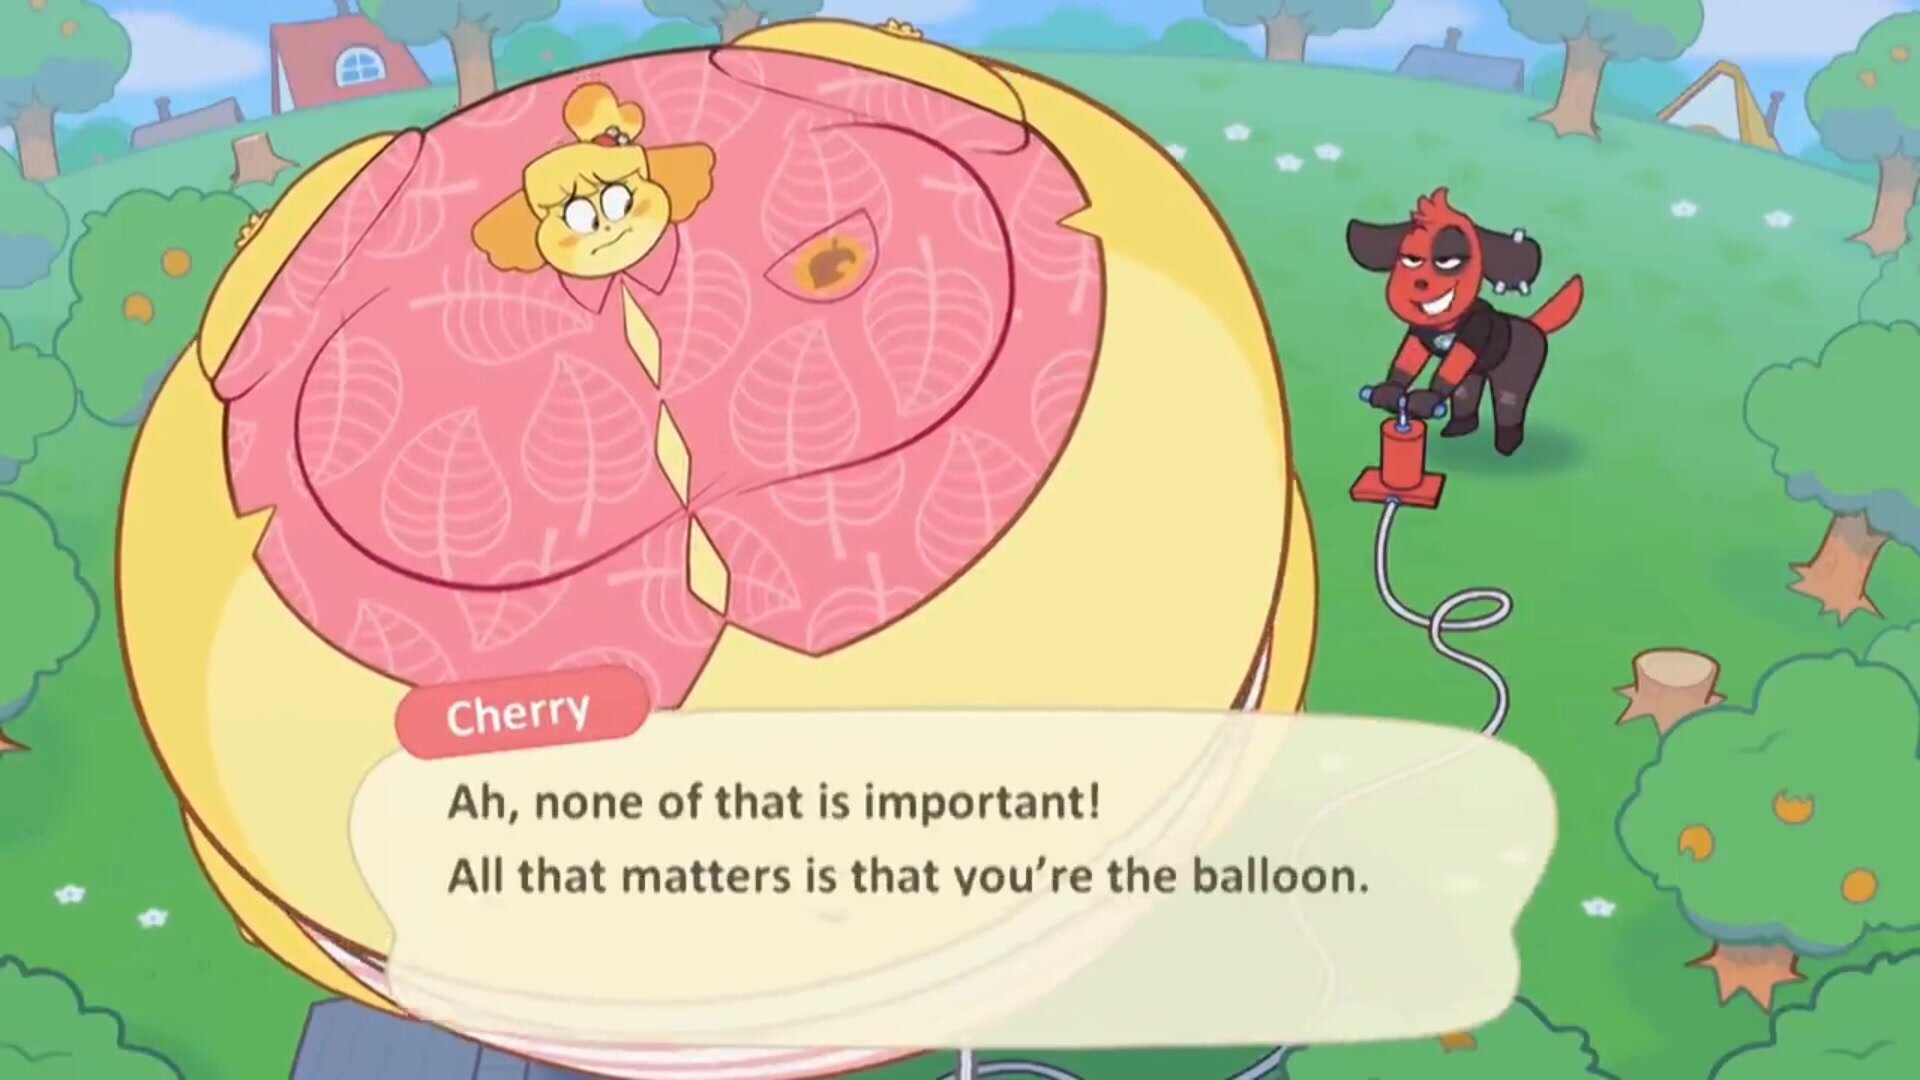 Isabelle is a Balloon [sound edit with voice acting]